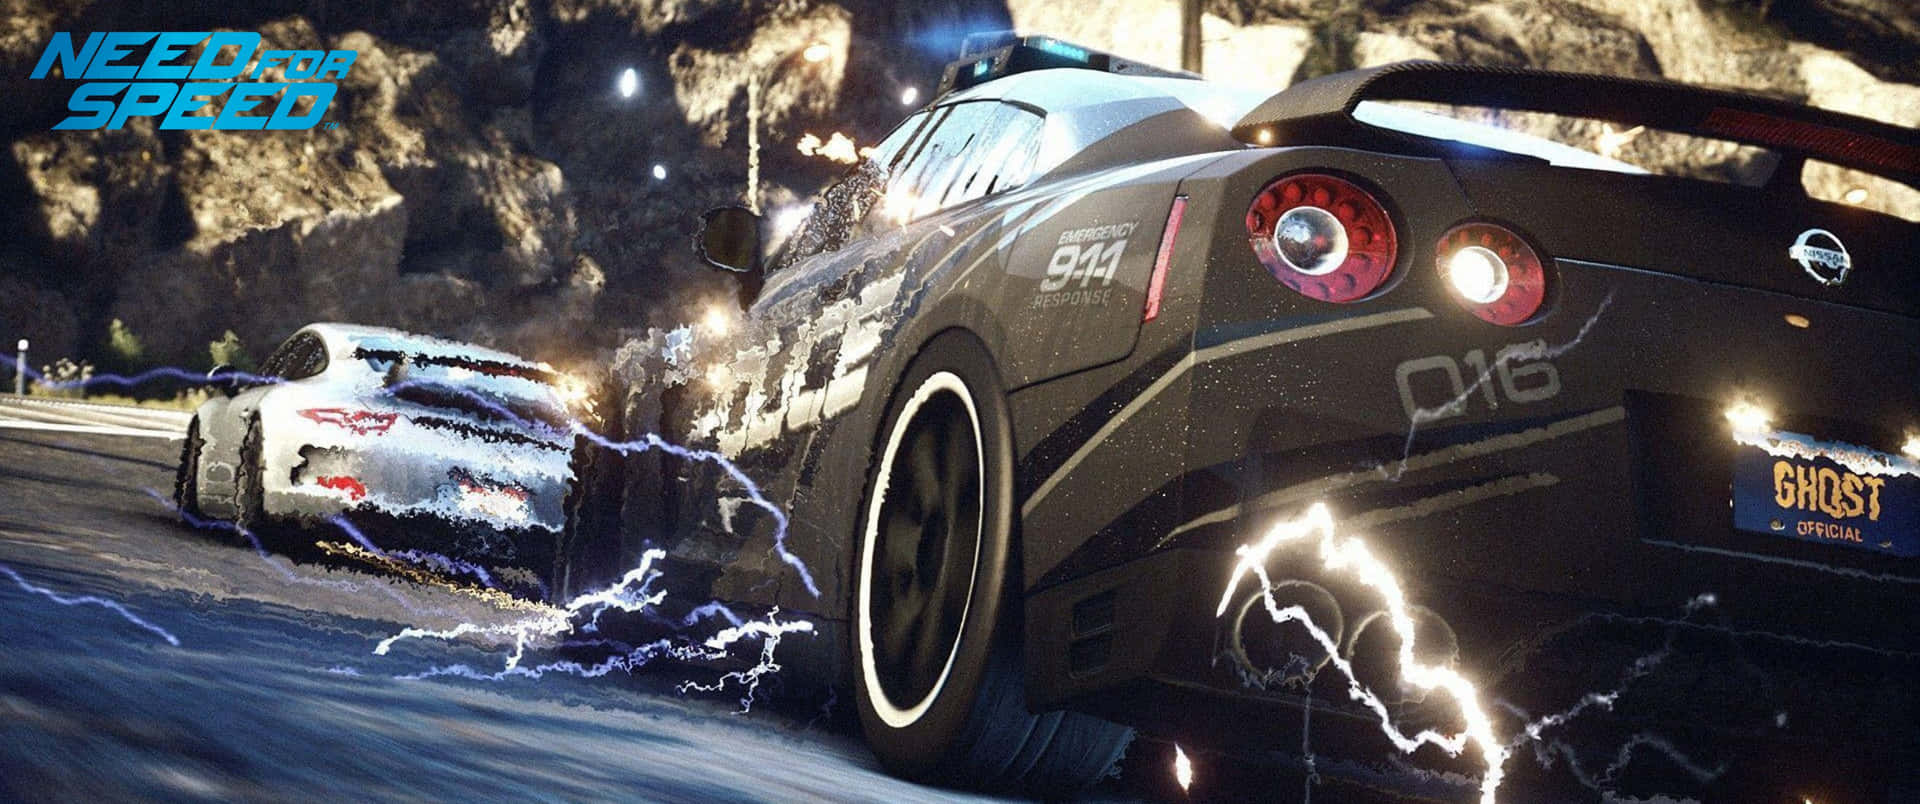 Need For Speed Pc Game